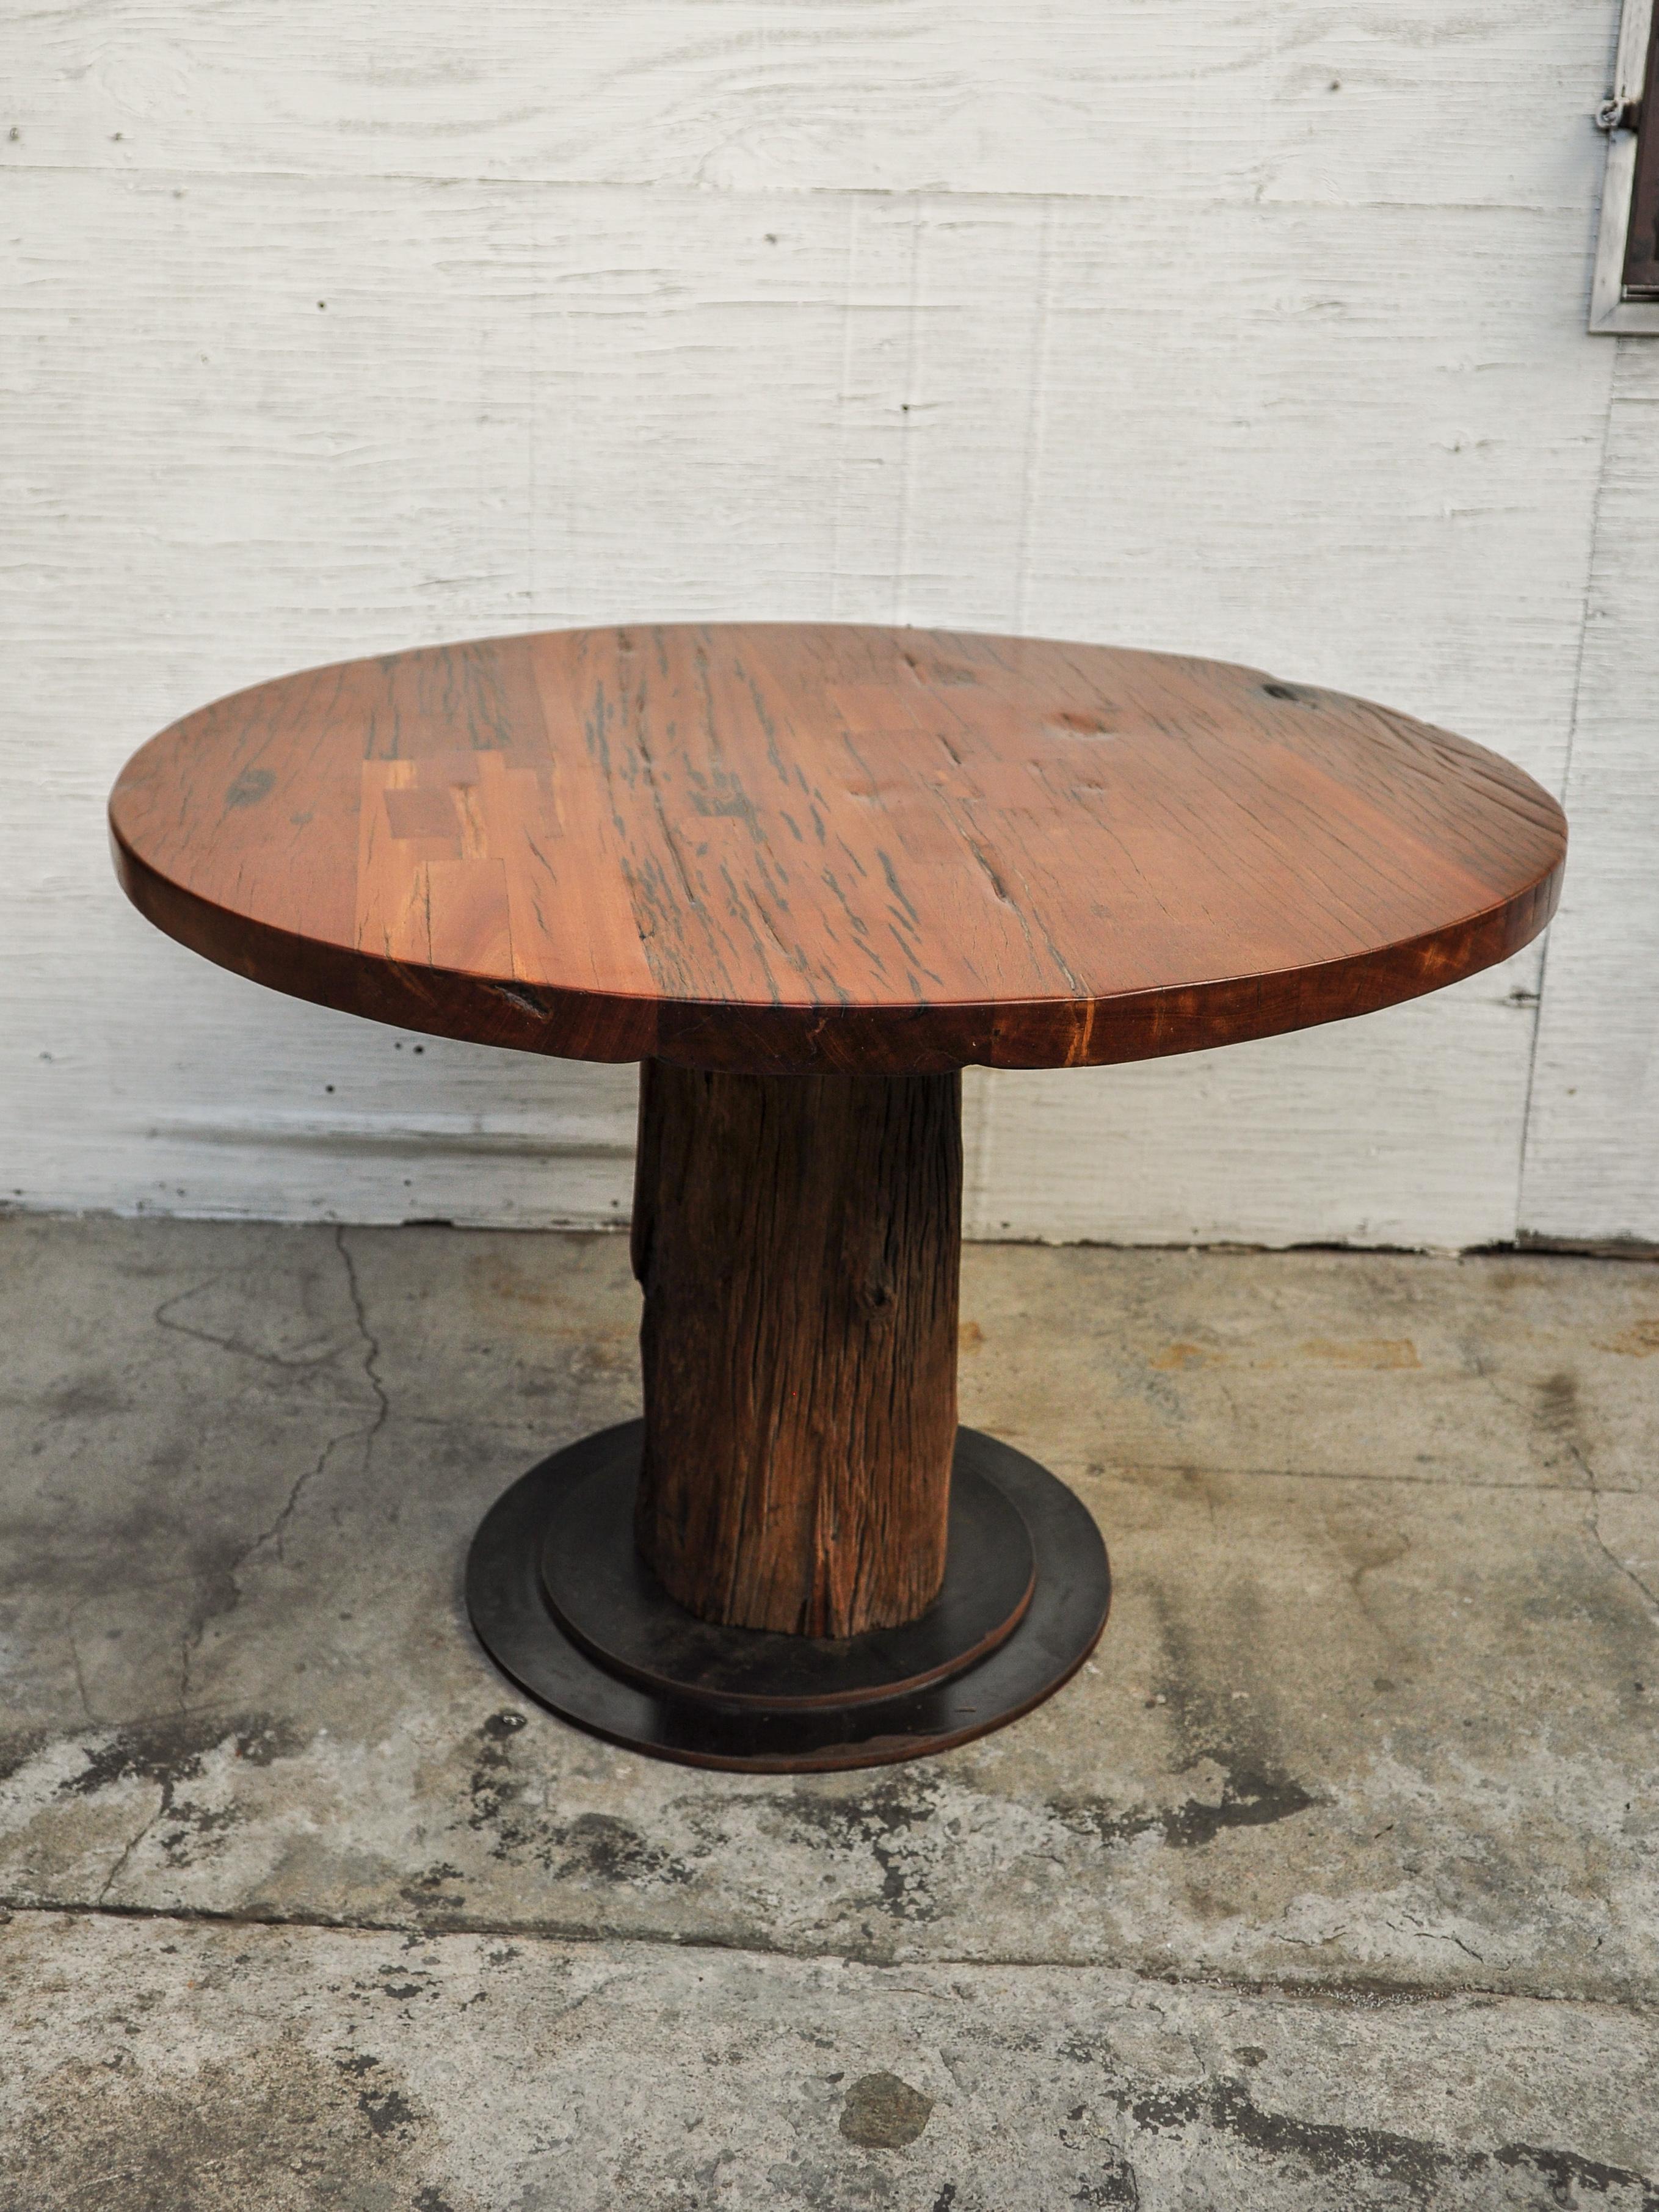 American Rustic Round Table Recycled Bridge Wood with Tiered Steel Plate Base